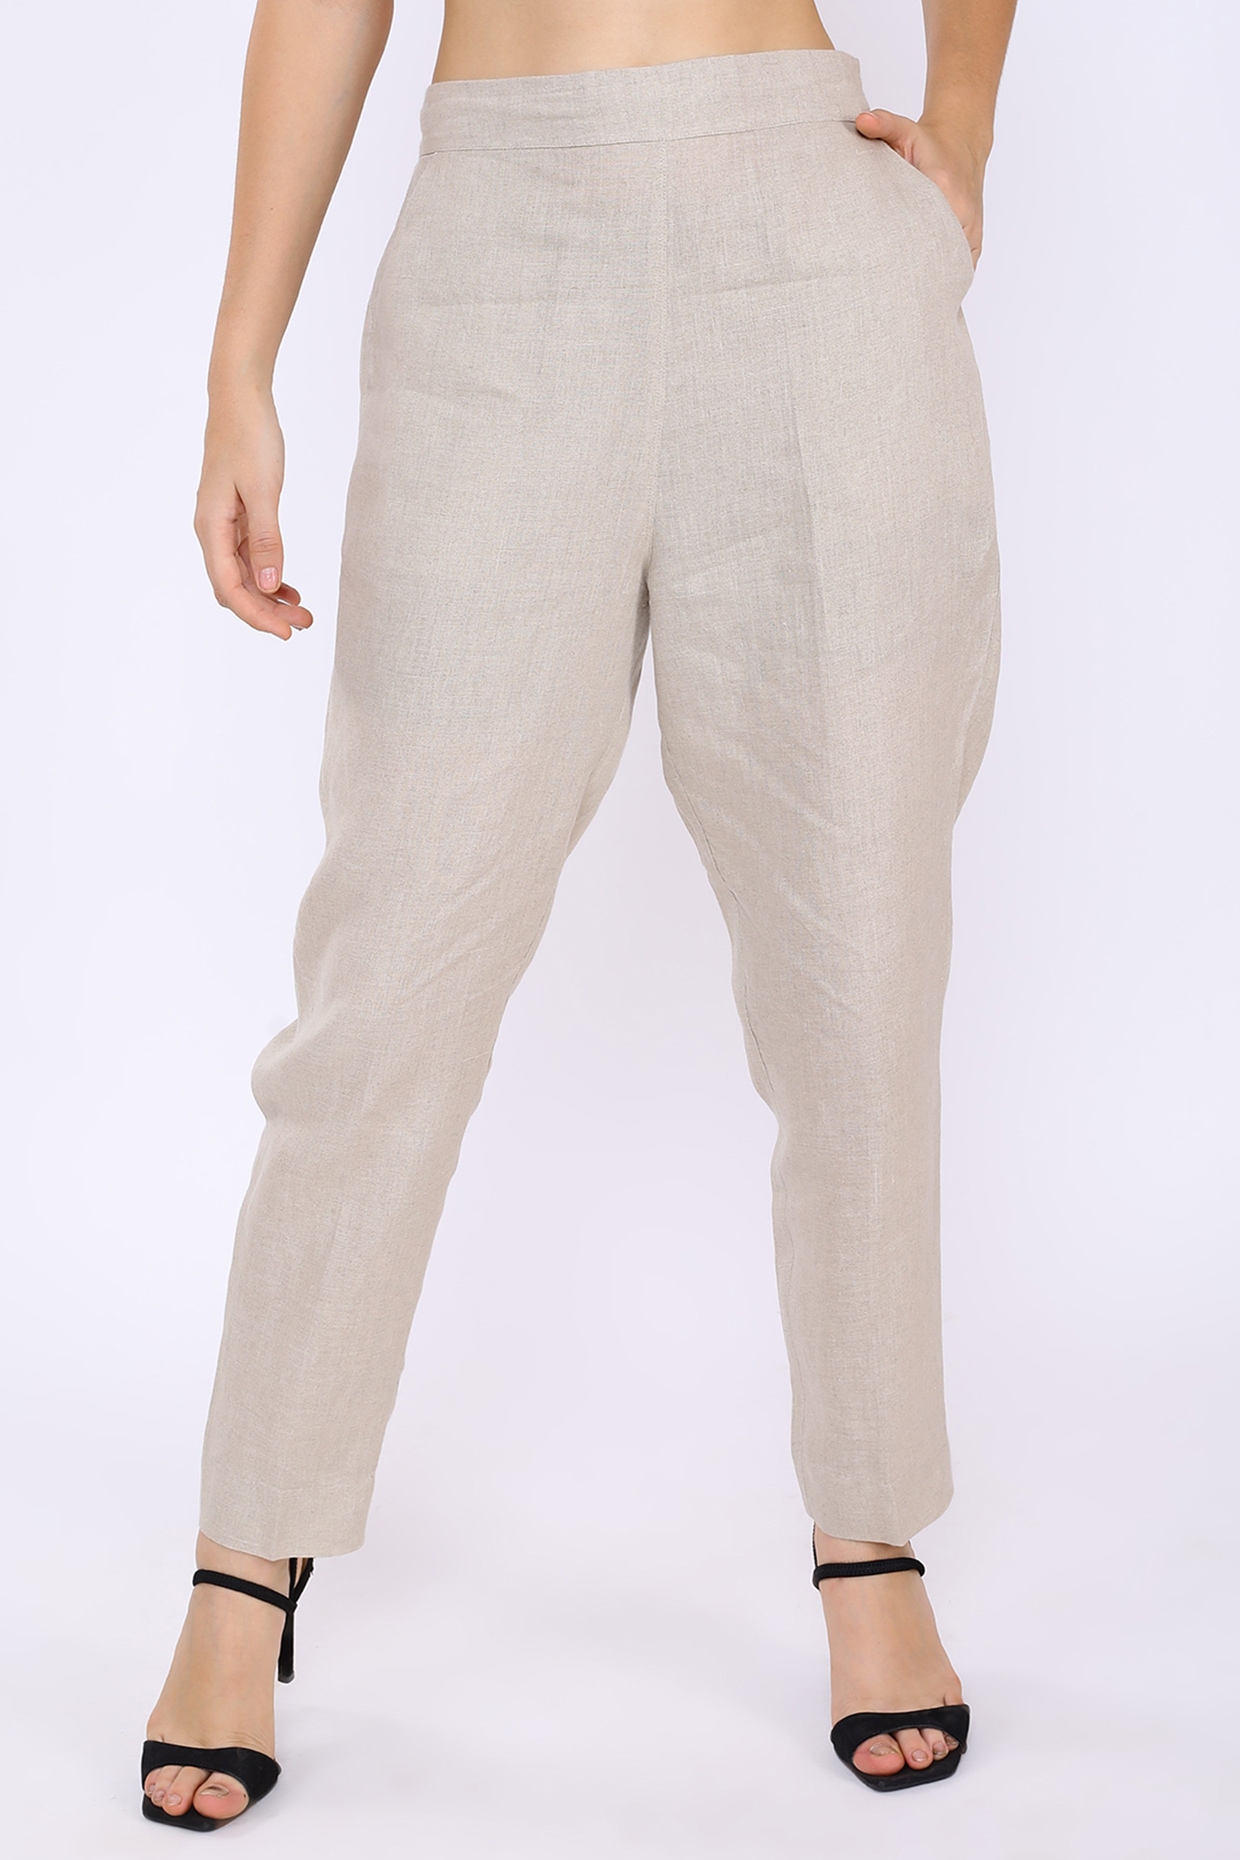 Buy Pencil Cut Pants for Women Online from India's Luxury Designers 2023